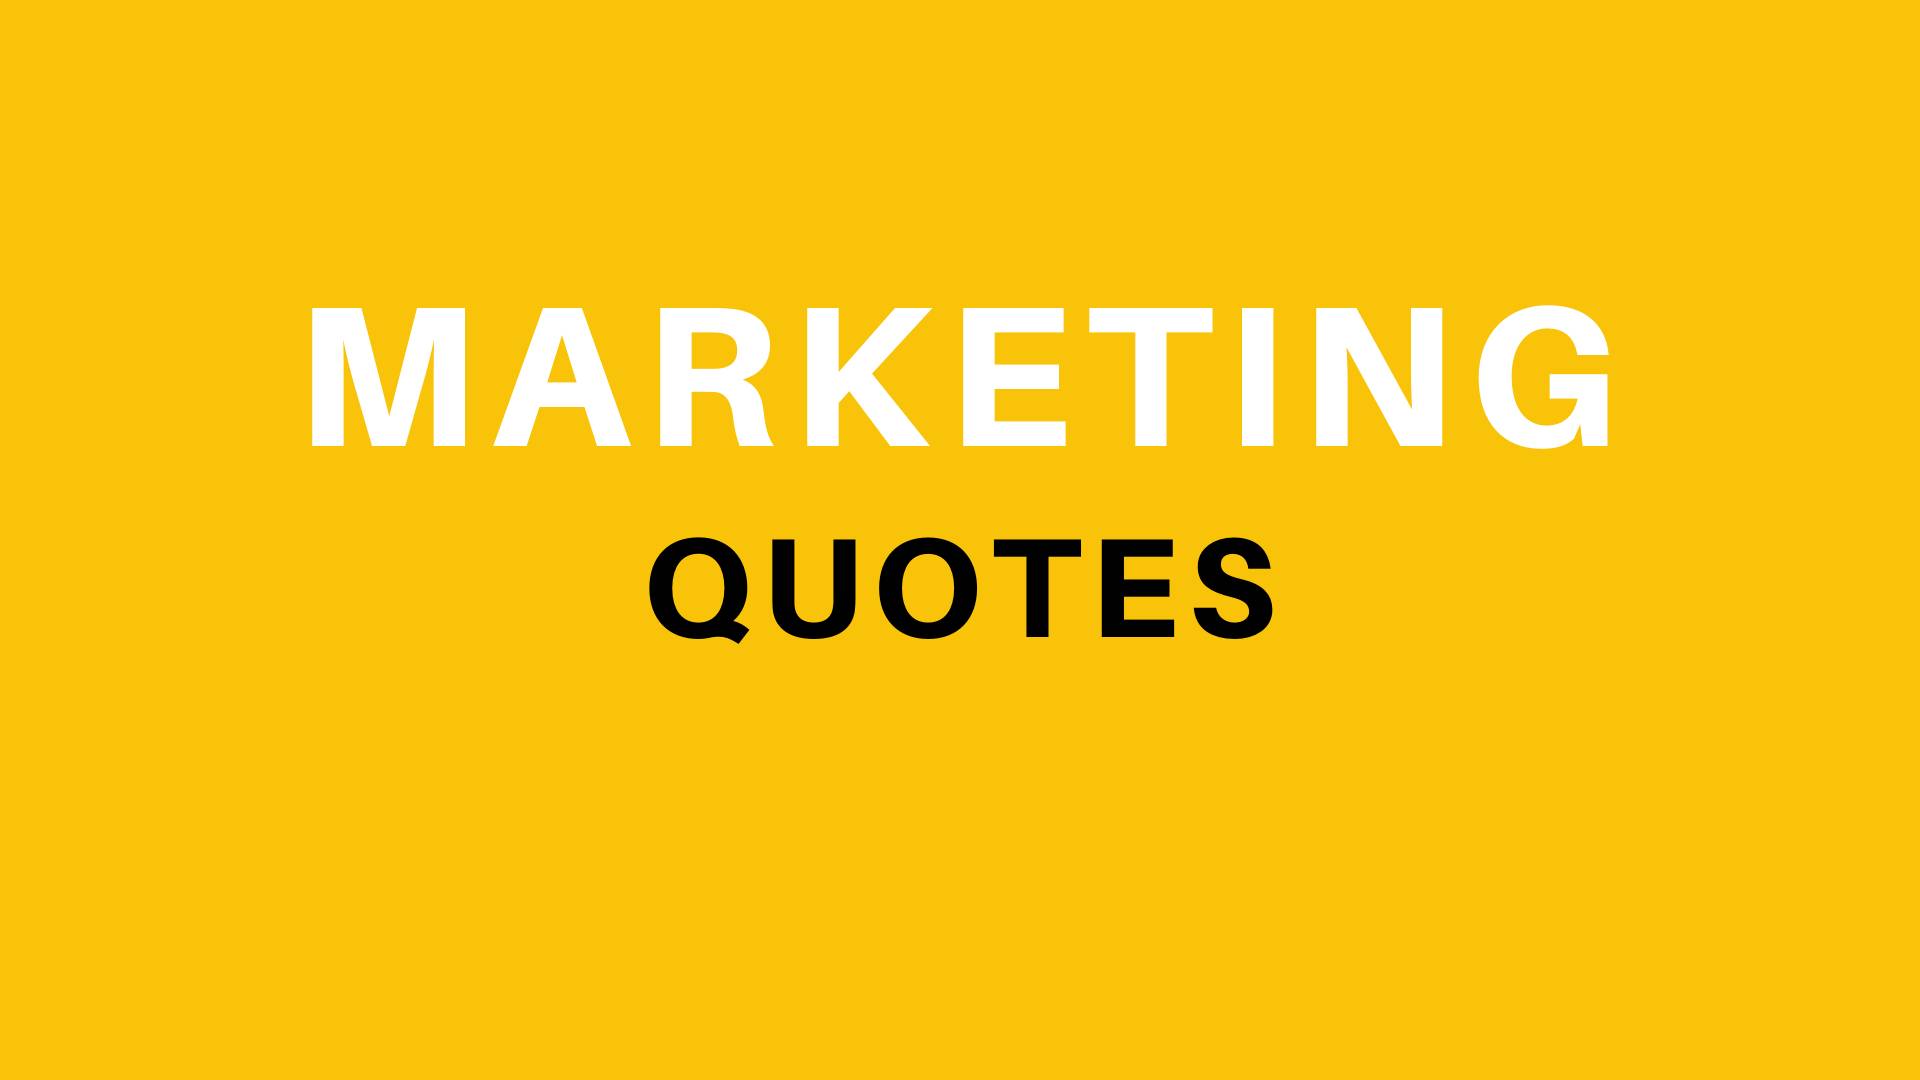 Marketing Quotes by famous authors and businessmen